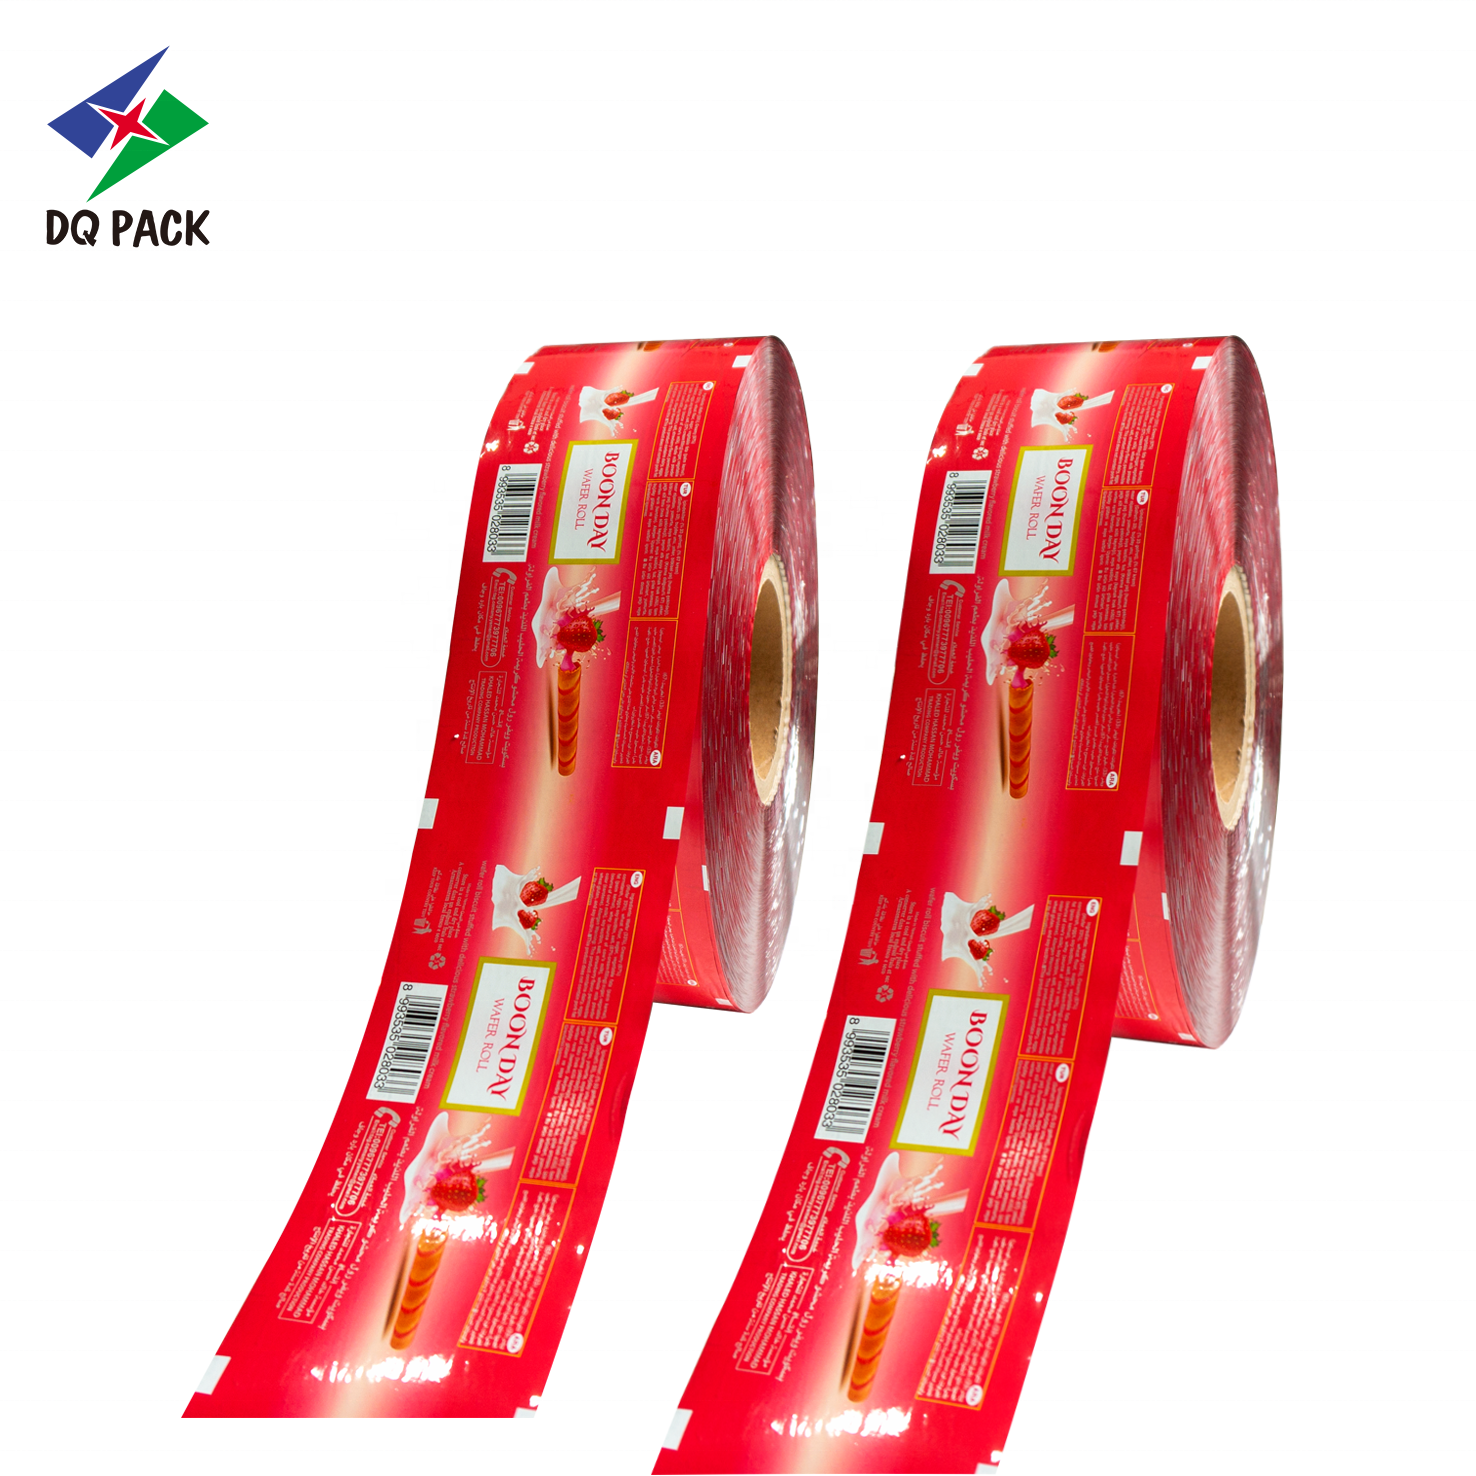 DQ PACK Factory Direct Price eco-friendly  Food Grade Metalllized Roll Film for snack chips food packaging